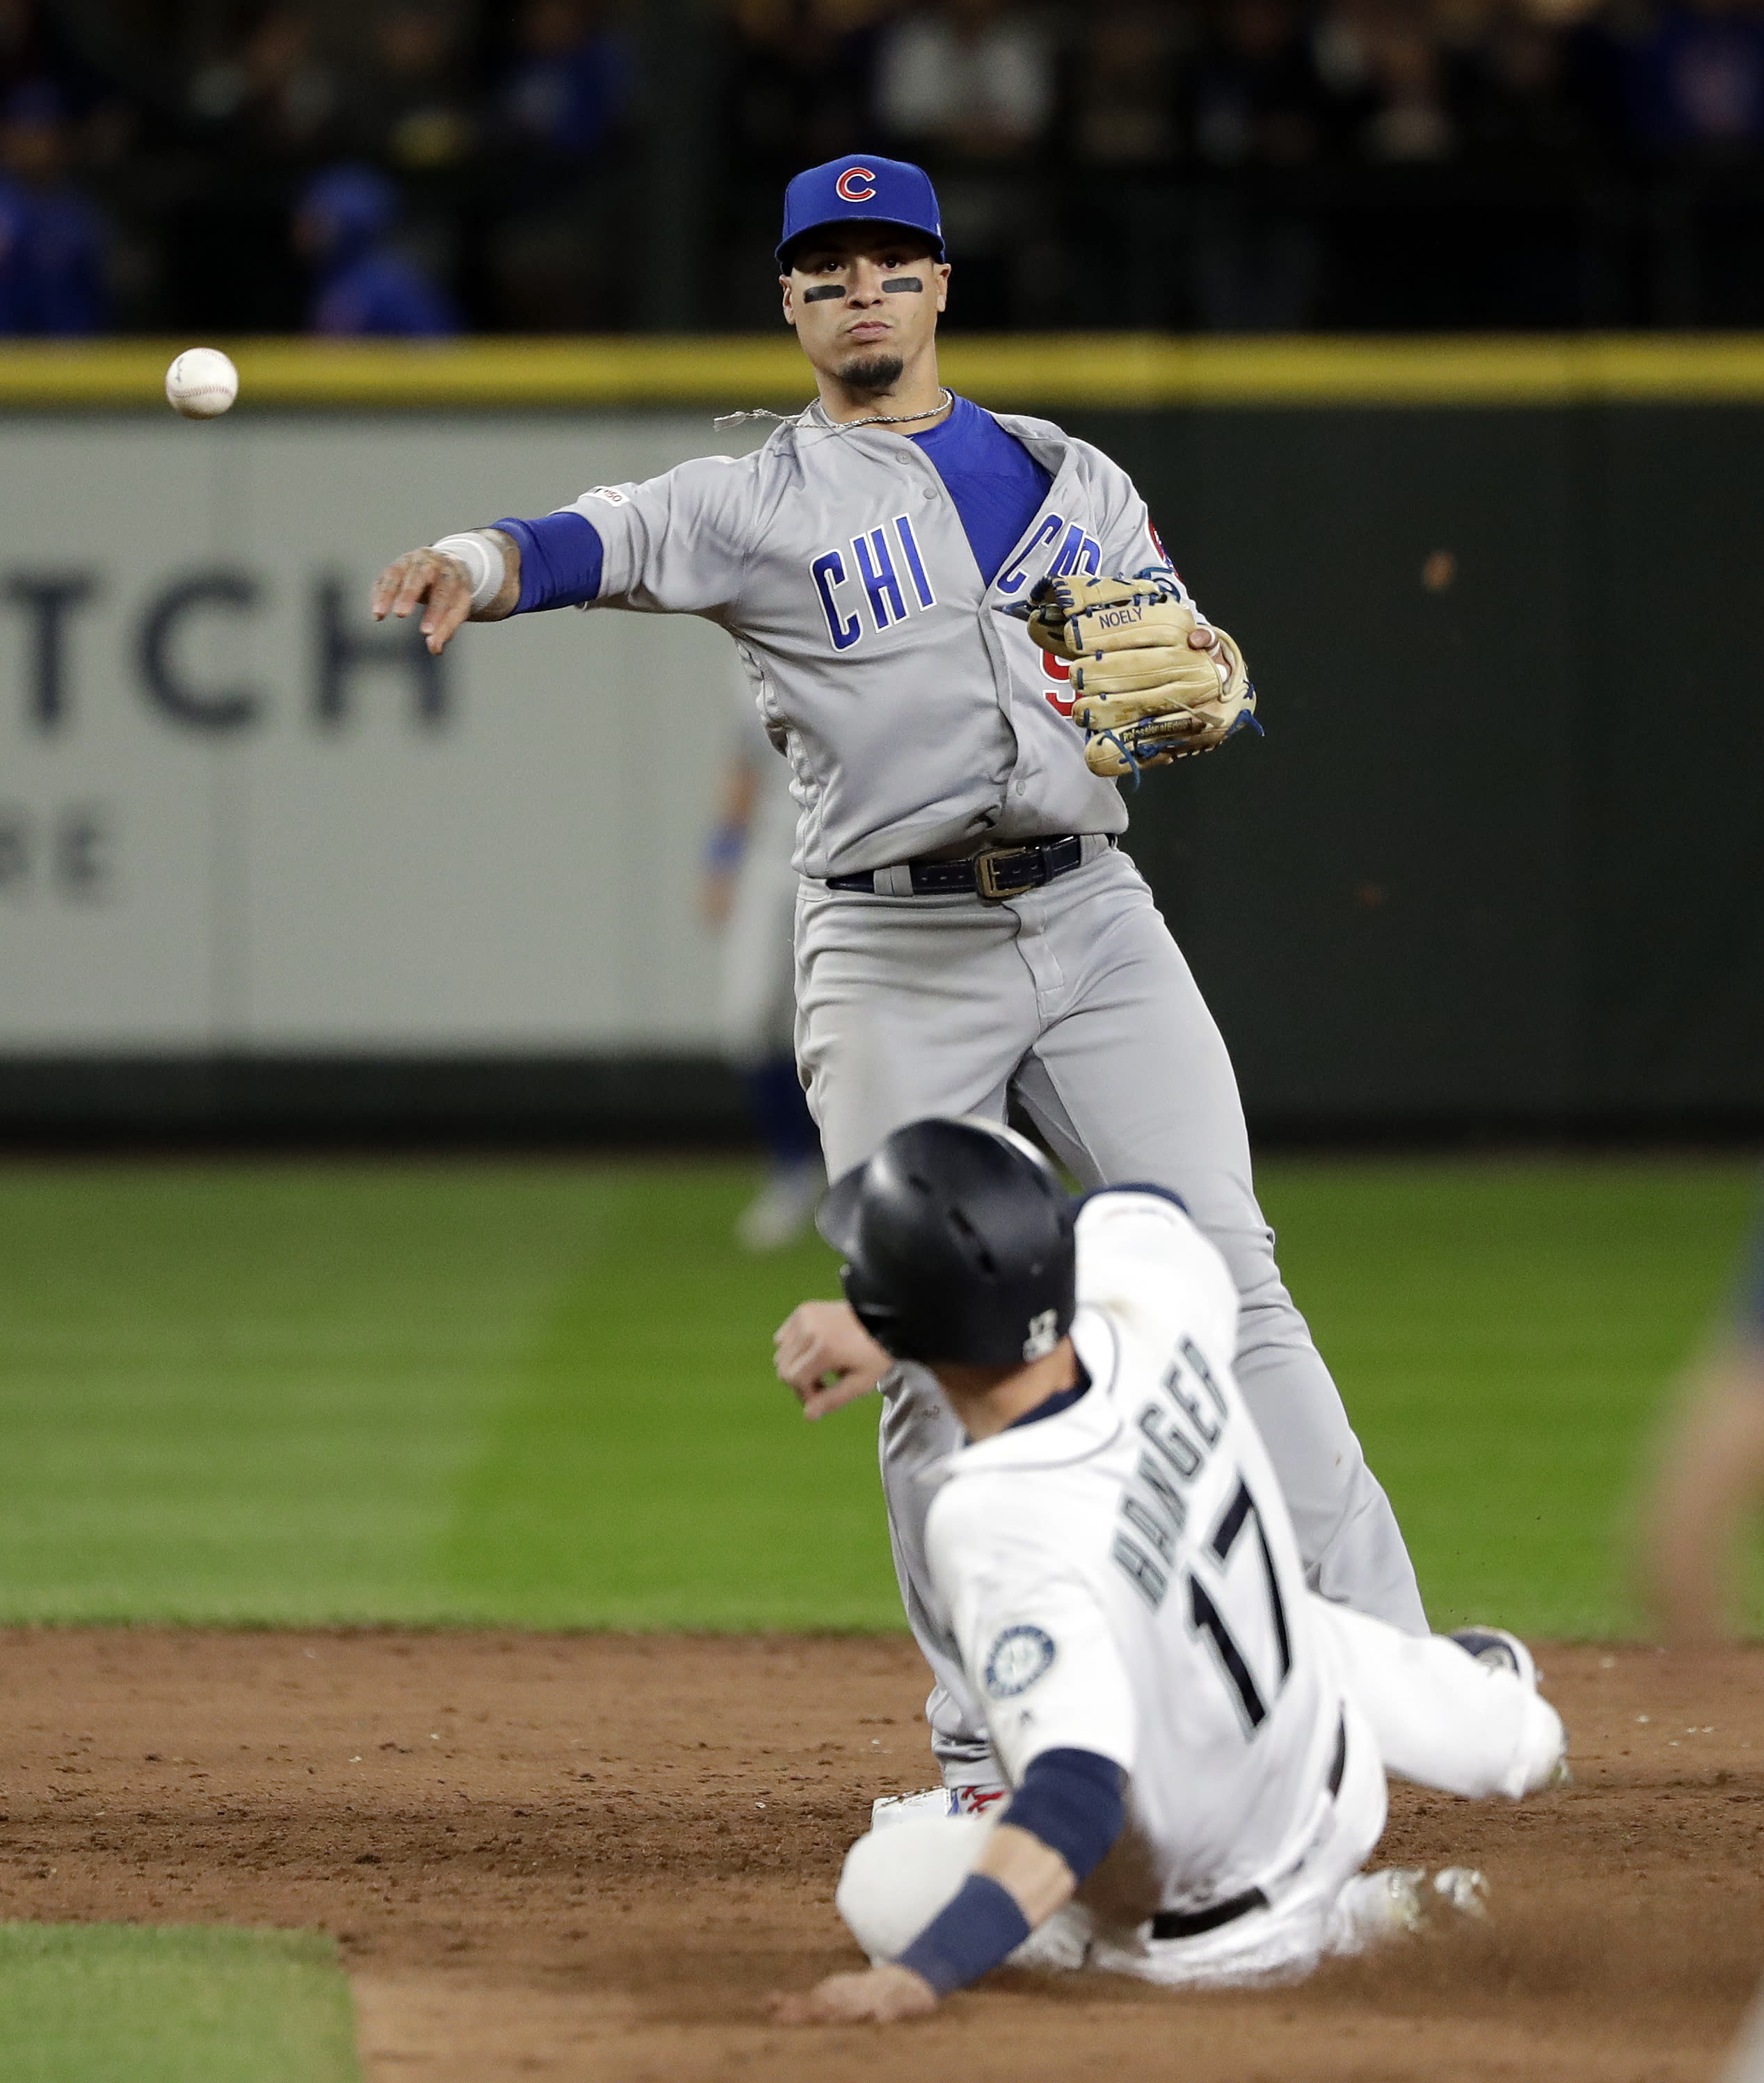 Schwarber S Homer Lifts Cubs To 6 5 Win Over Mariners